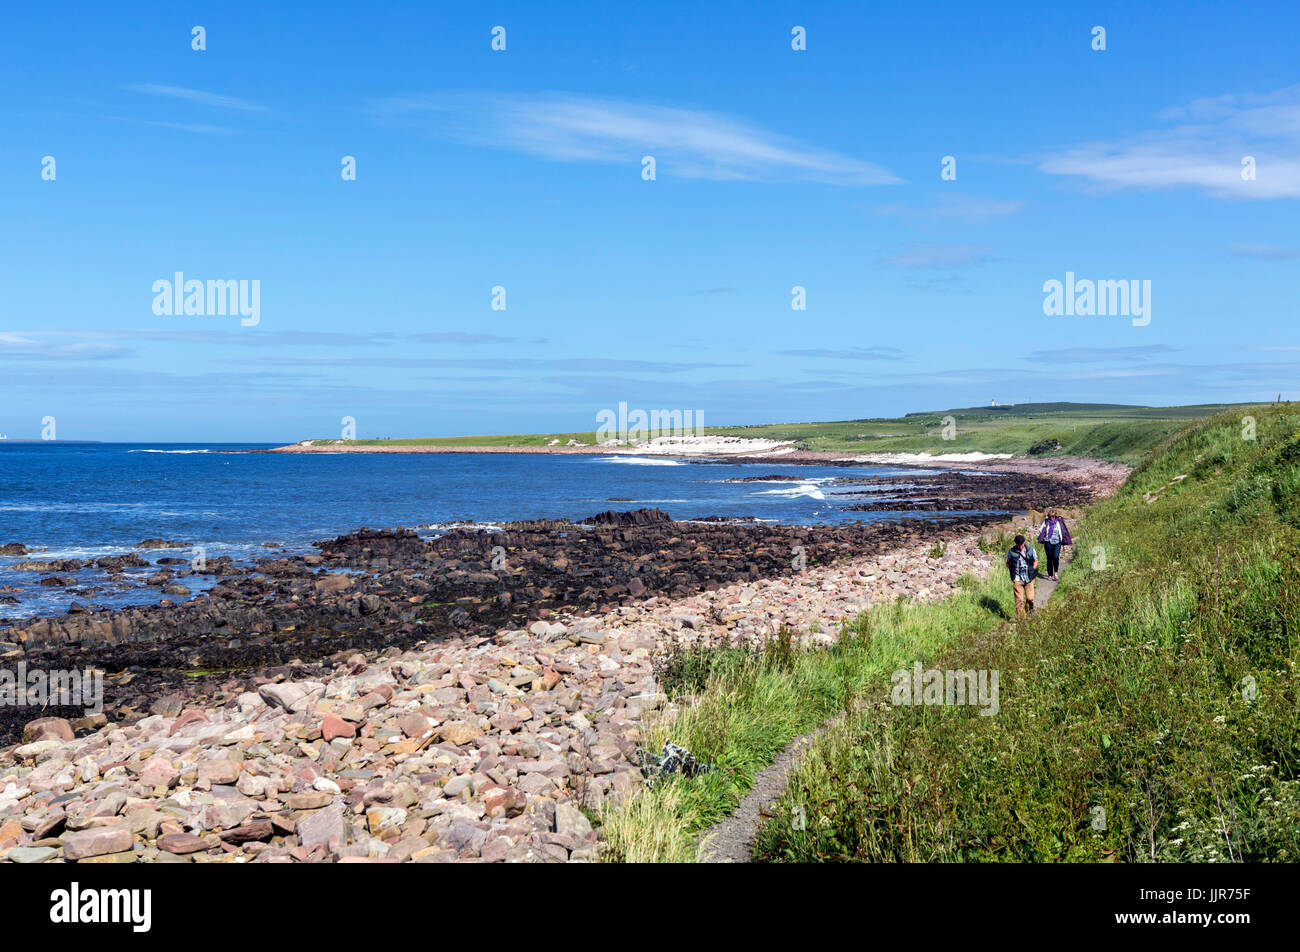 John O'Groats, Scotland. Walkers on footpath from John O'Groats to Duncansby Head, the actual most north easterly point in mainland UK. Stock Photo